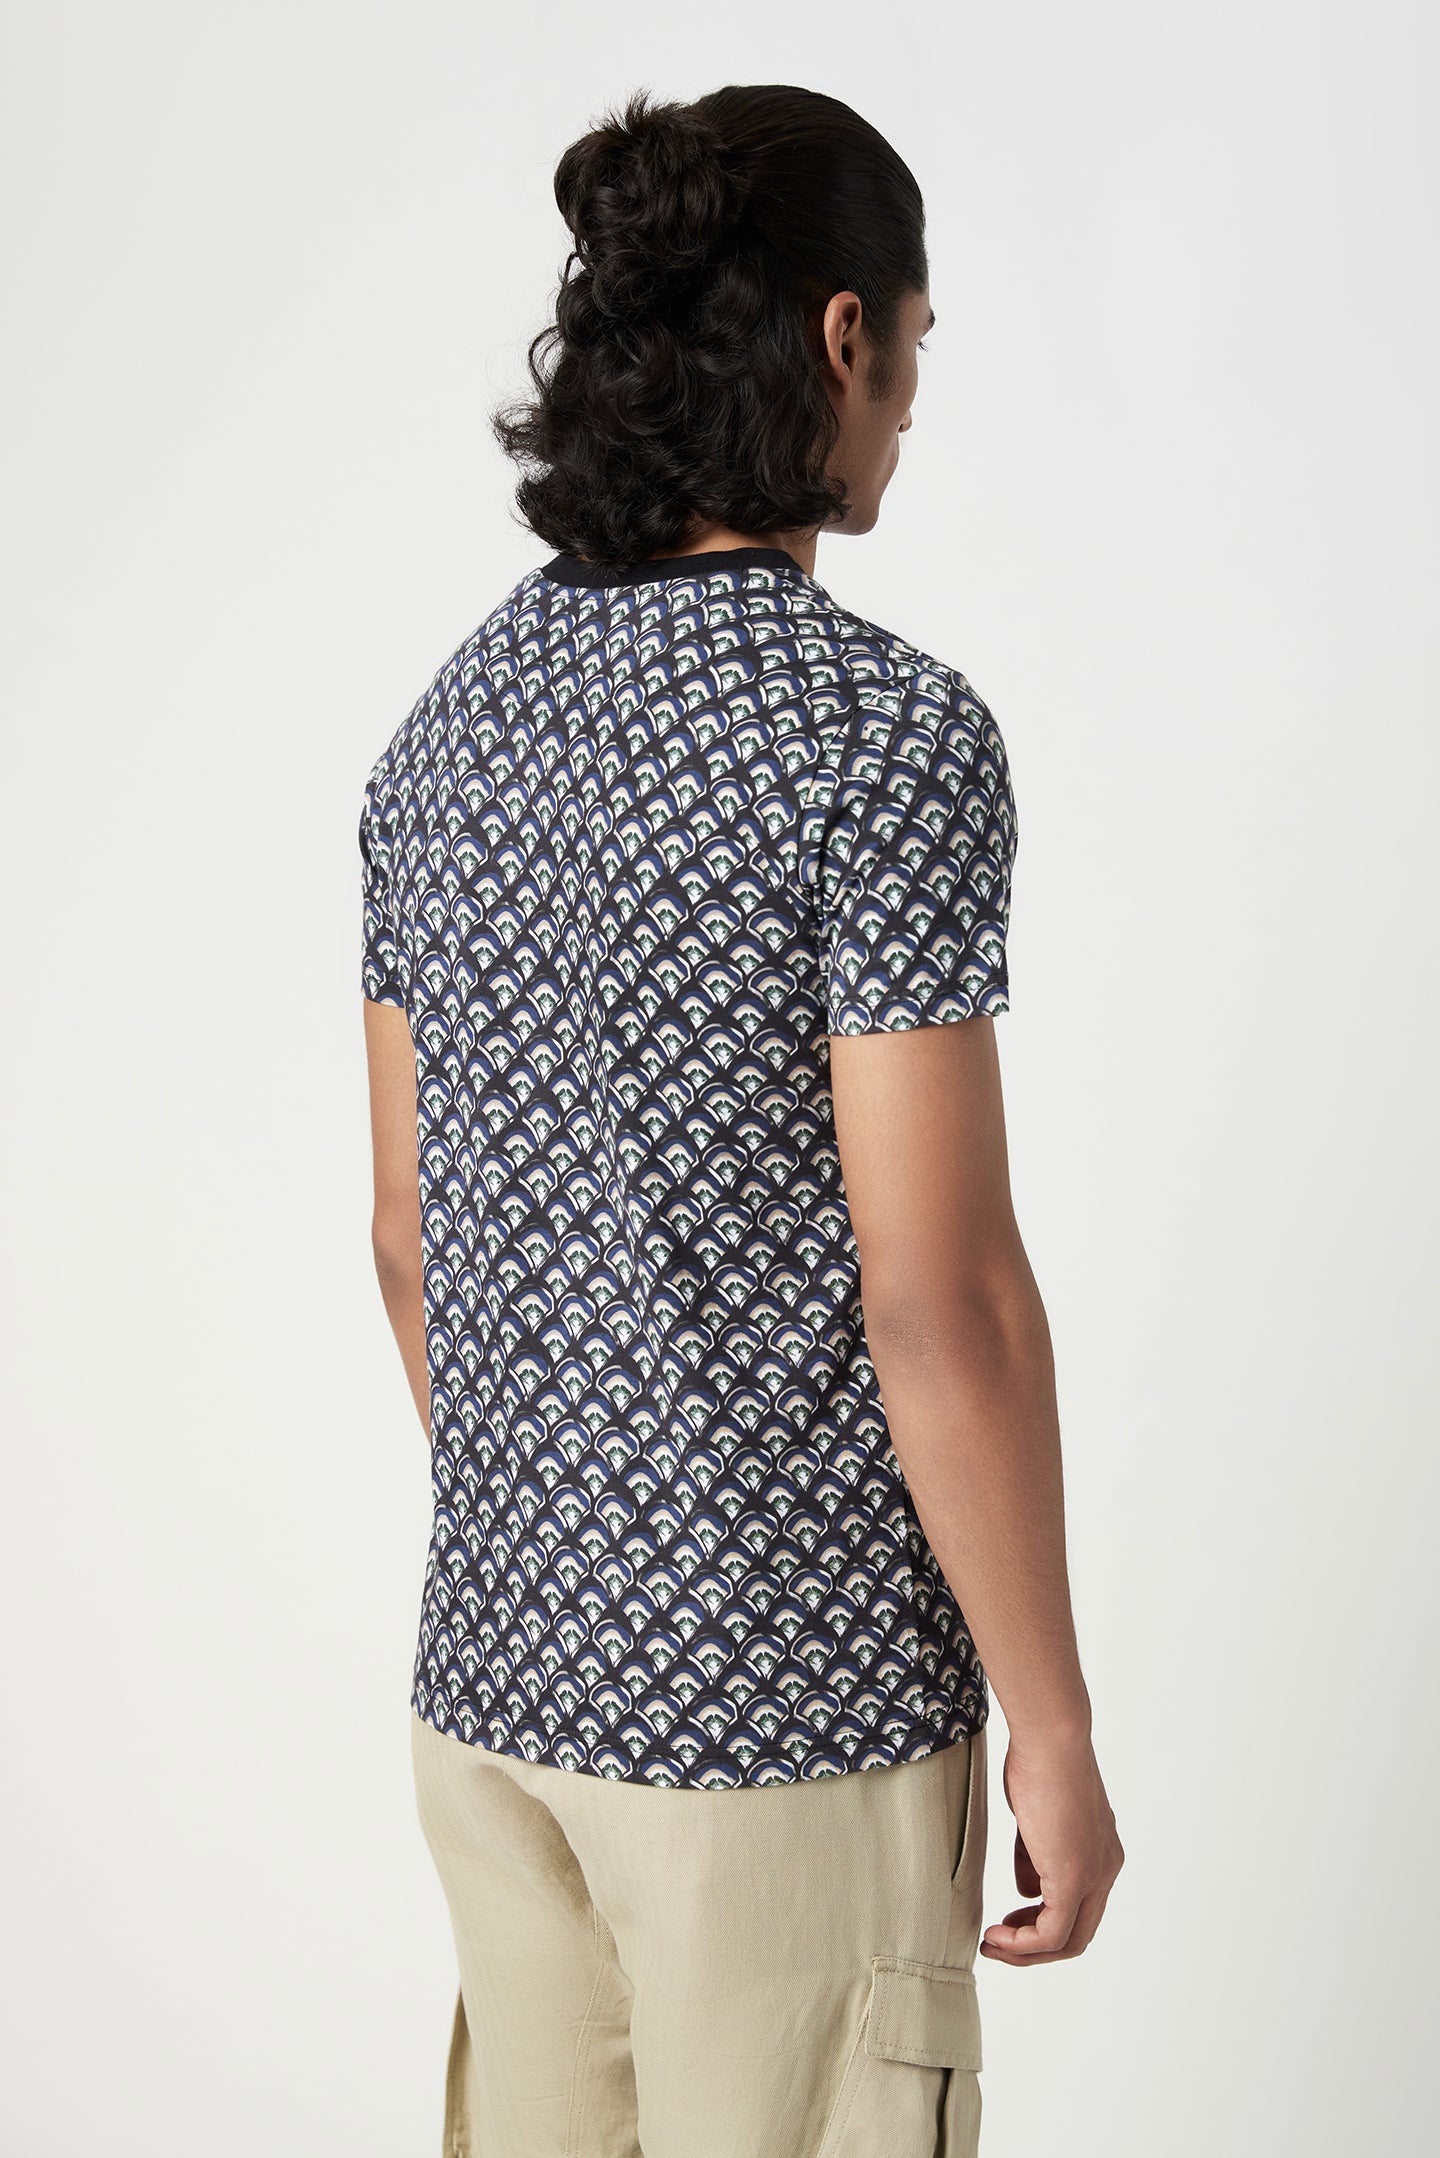 Regular Fit T-Shirt in All-Over Scallop Print